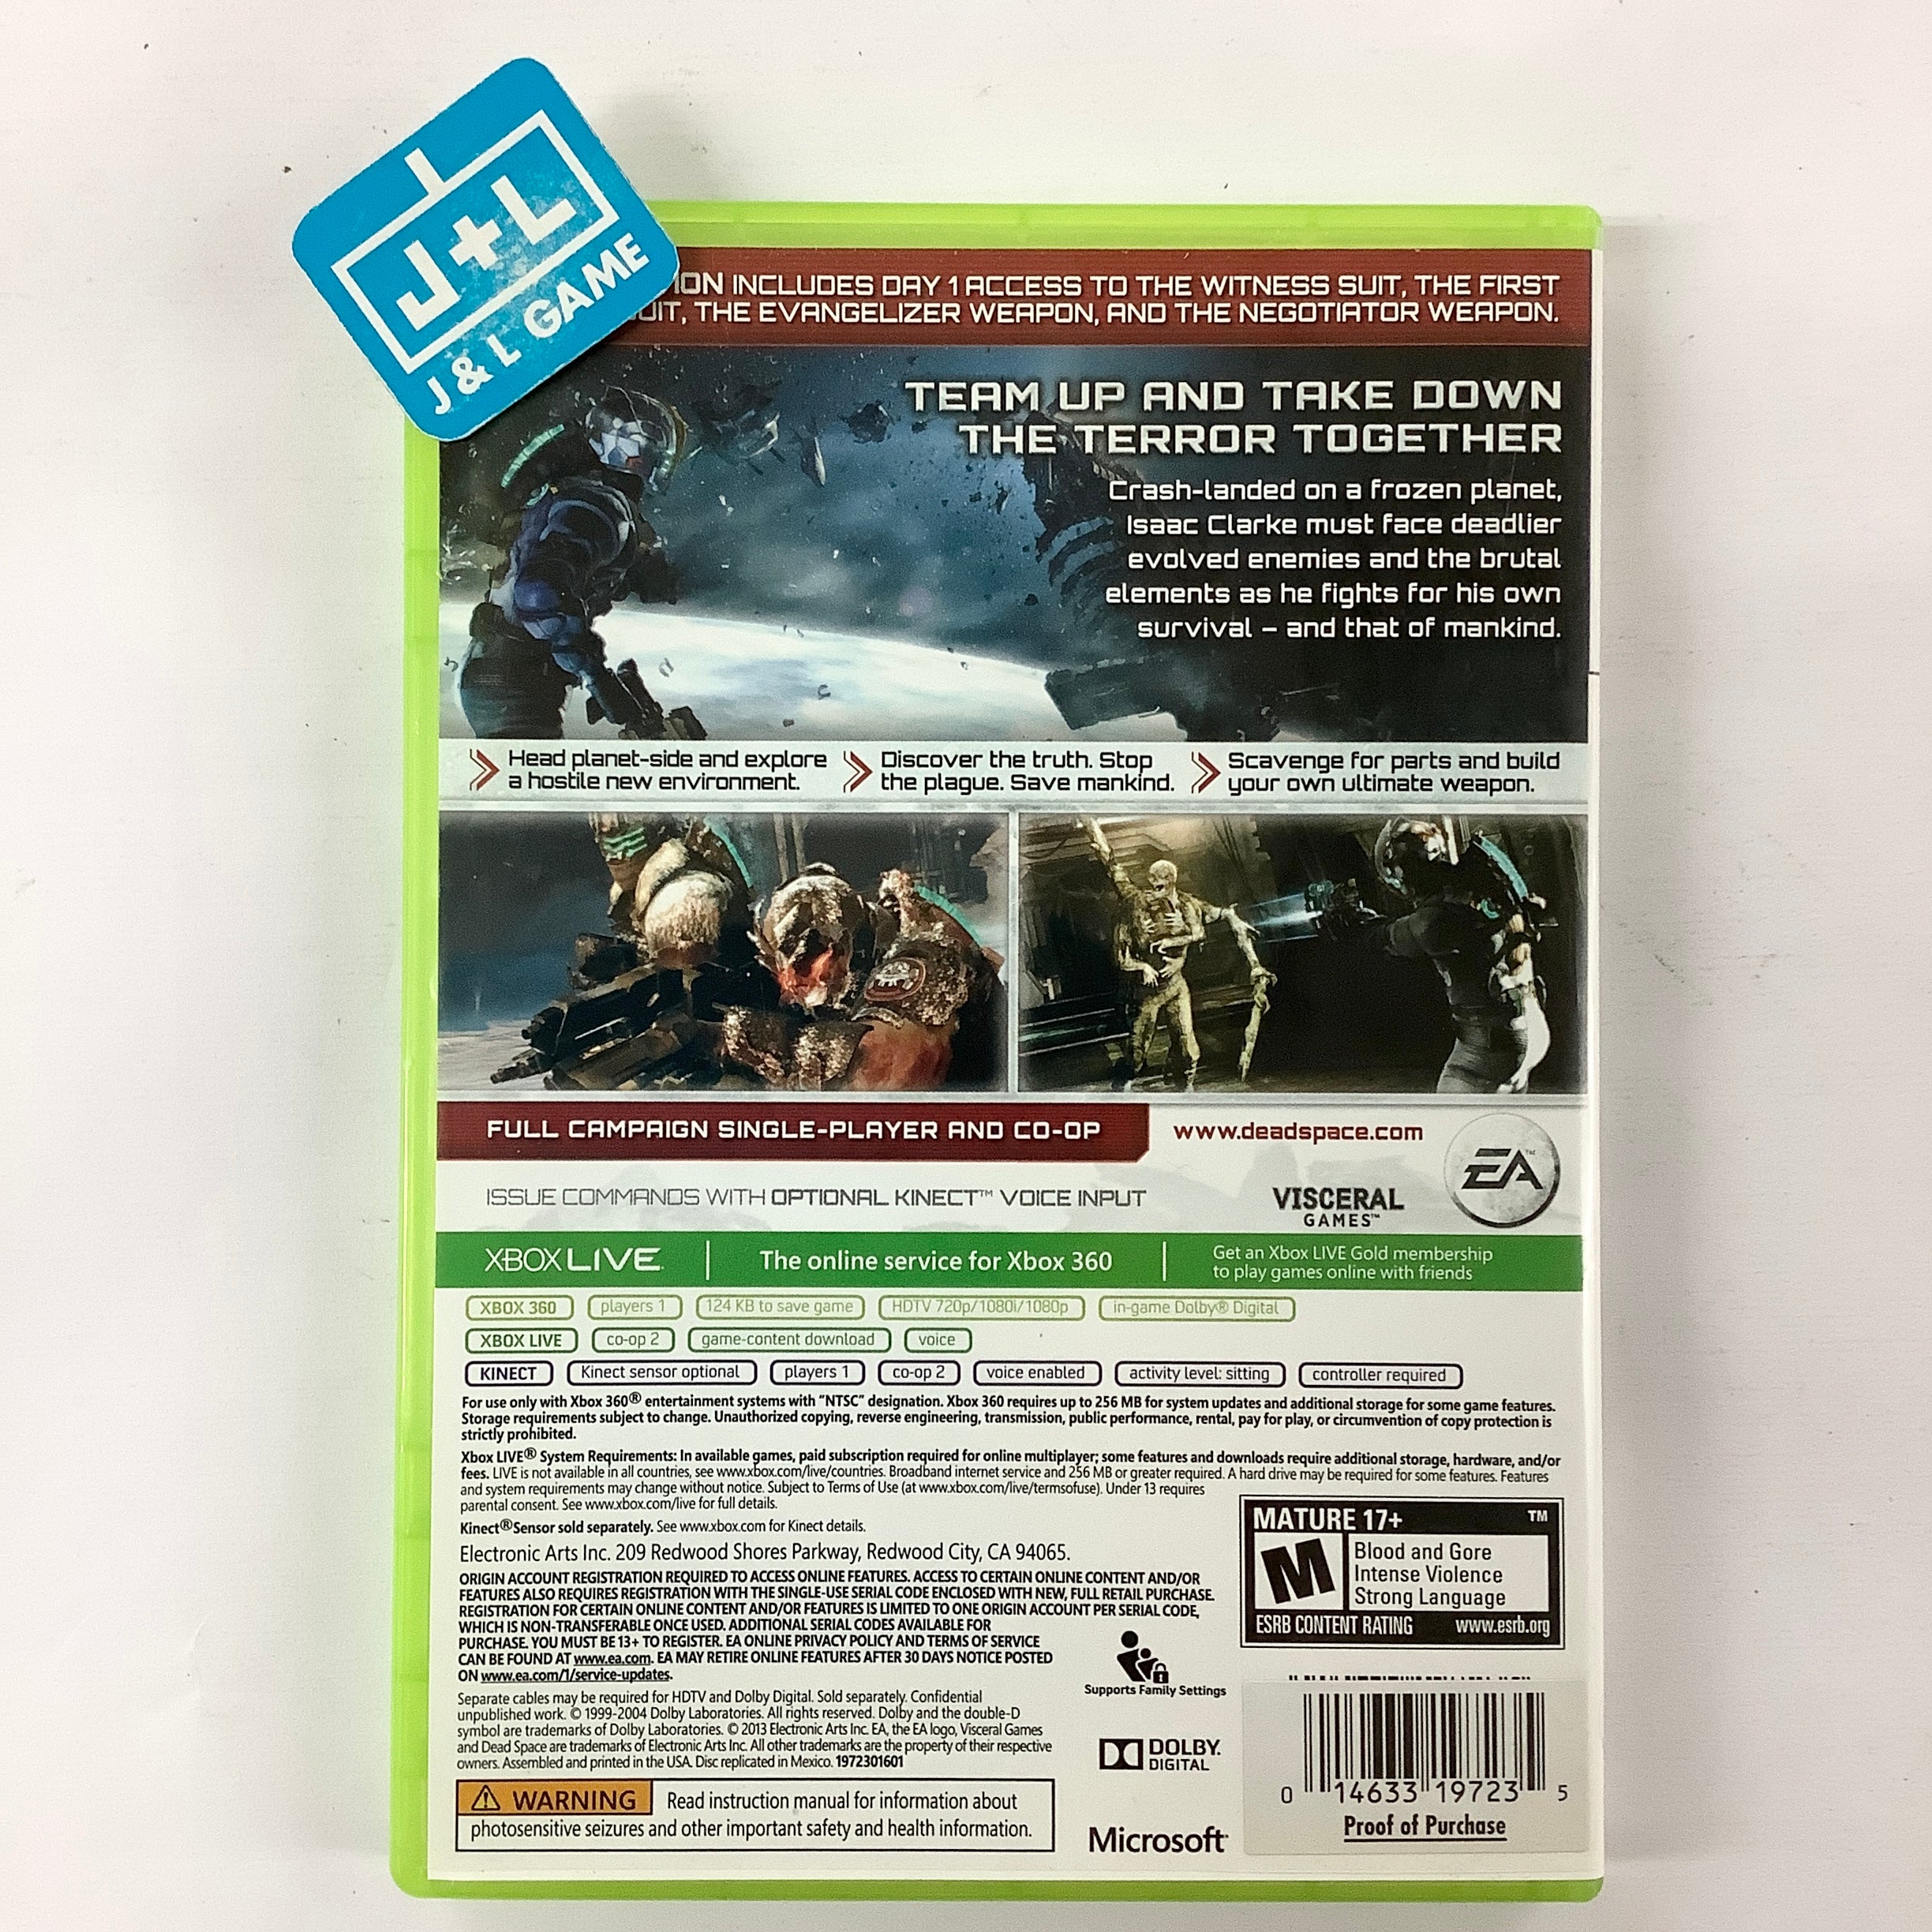 Dead Space 3 (Limited Edition) - Xbox 360 [Pre-Owned] Video Games Electronic Arts   